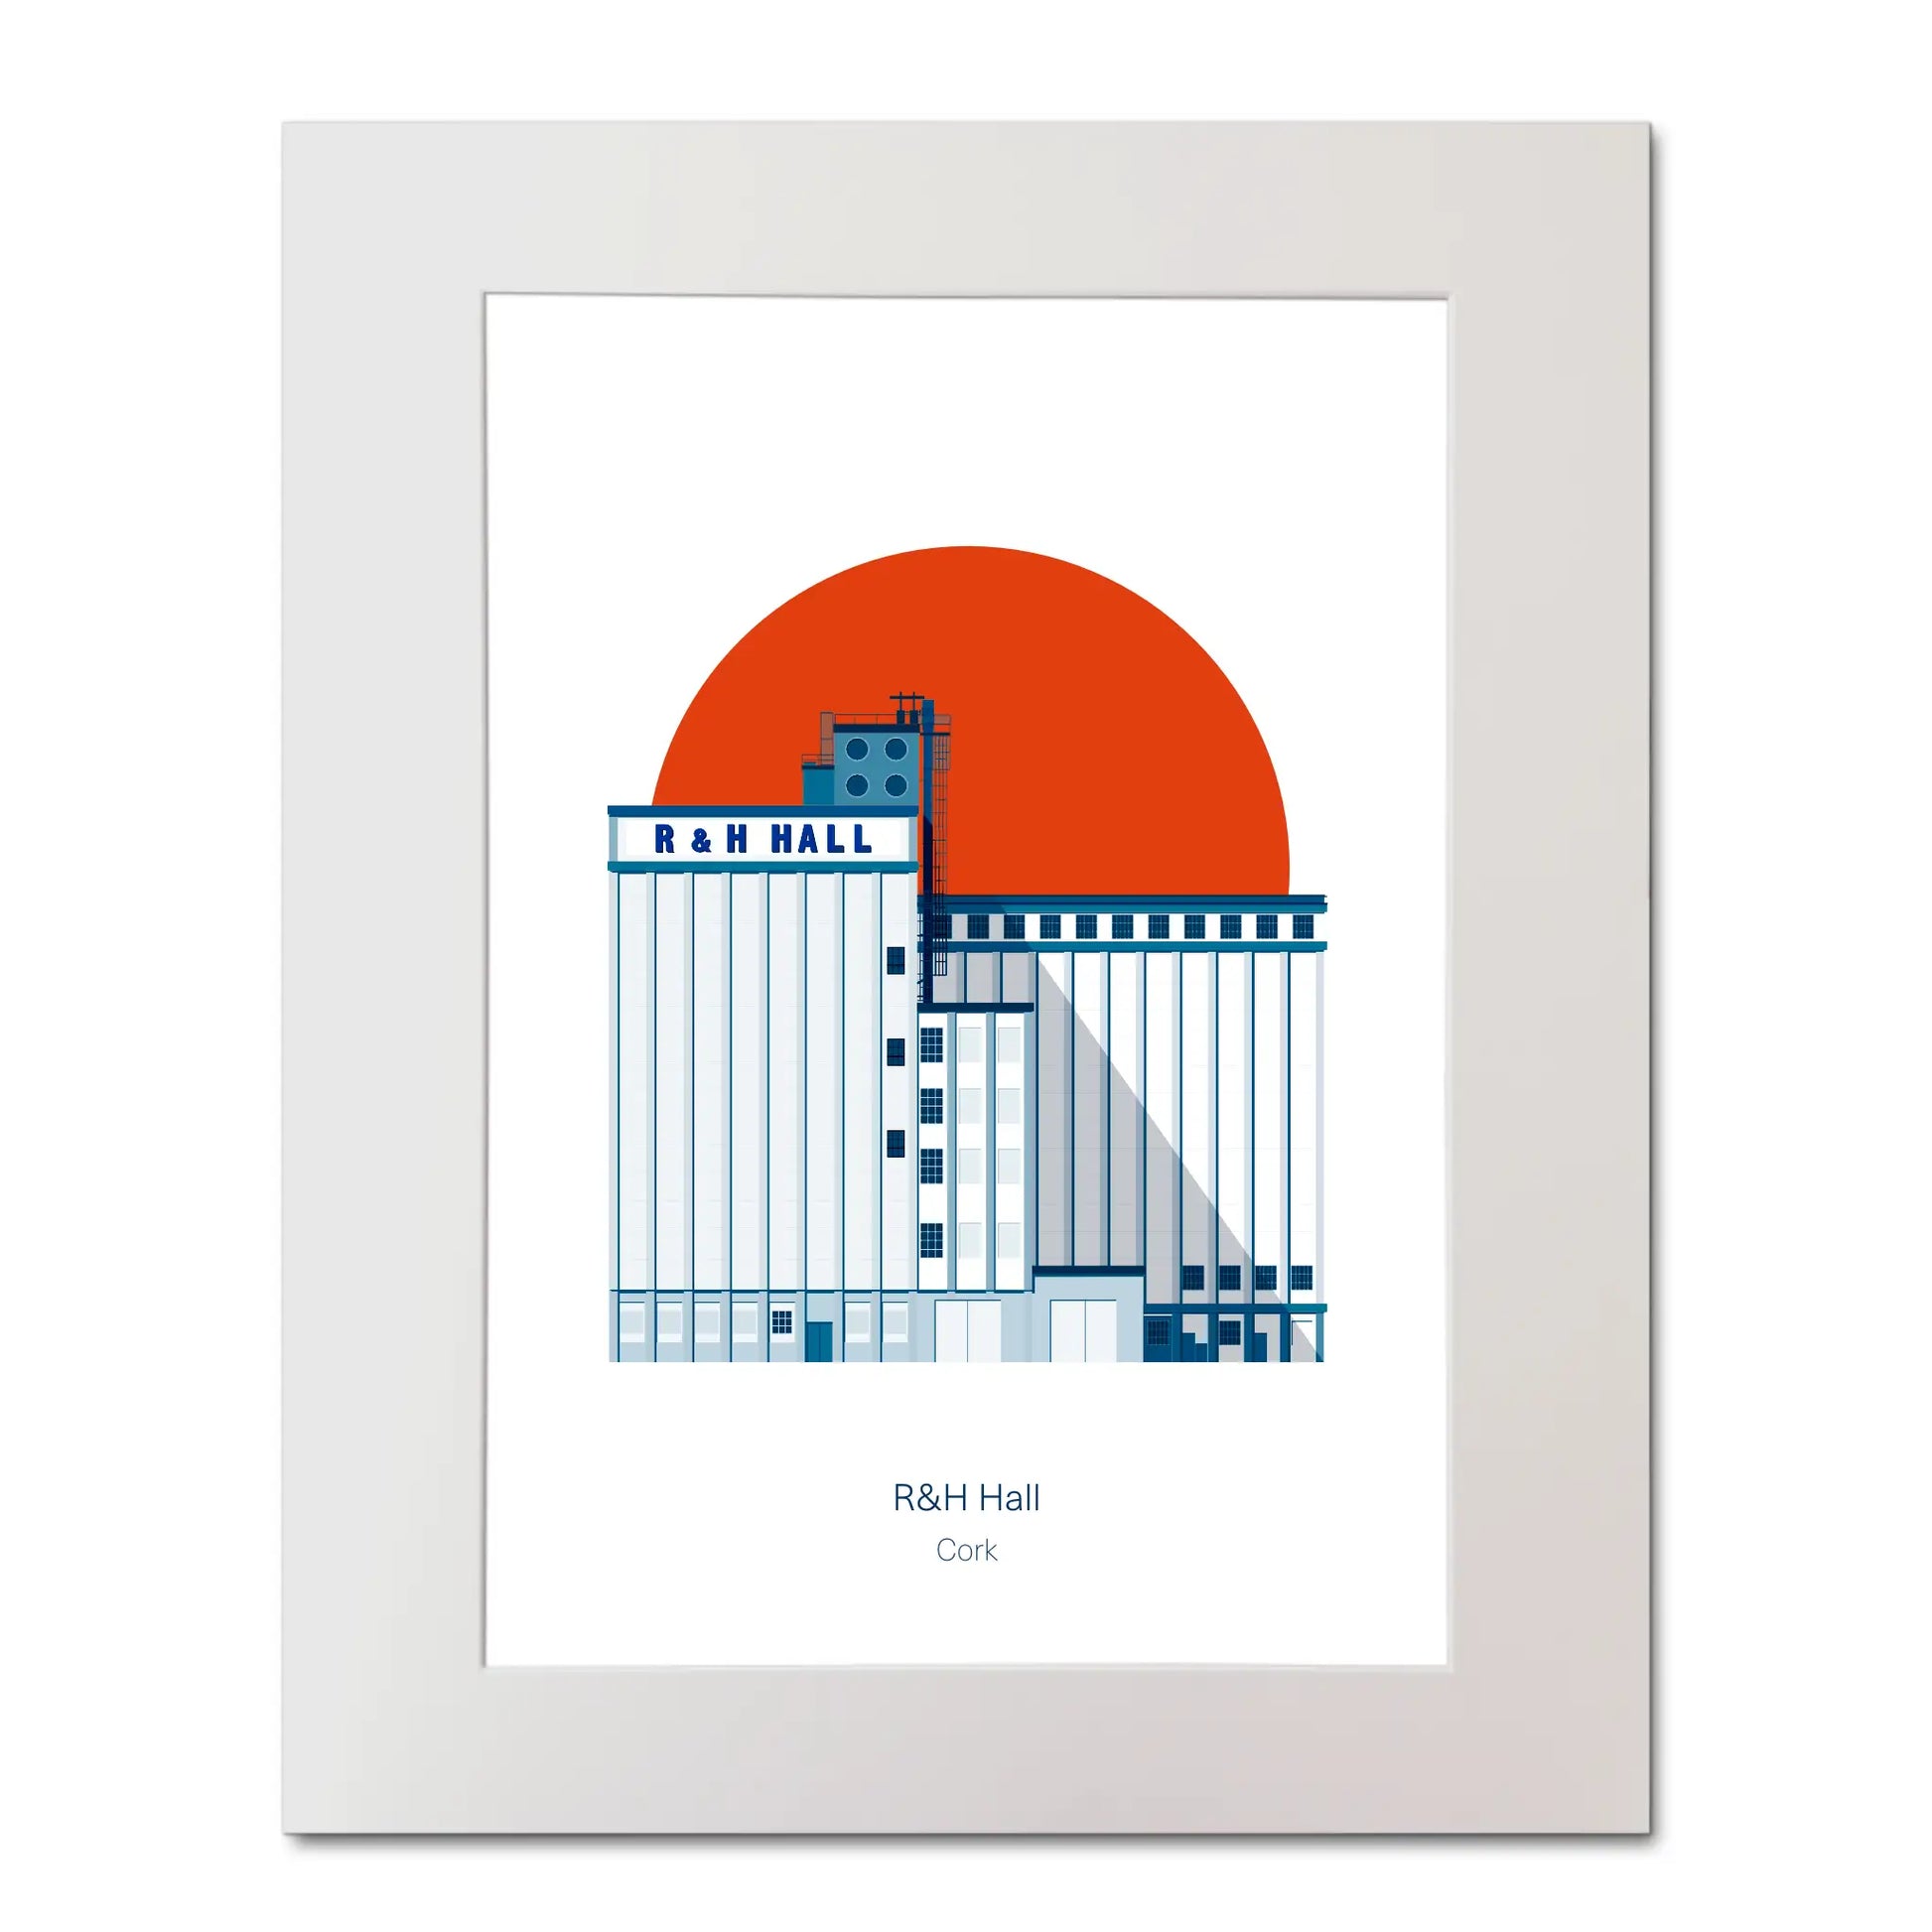 Mounted contemporary art print of R&H Hall in Port of Cork, with red background.